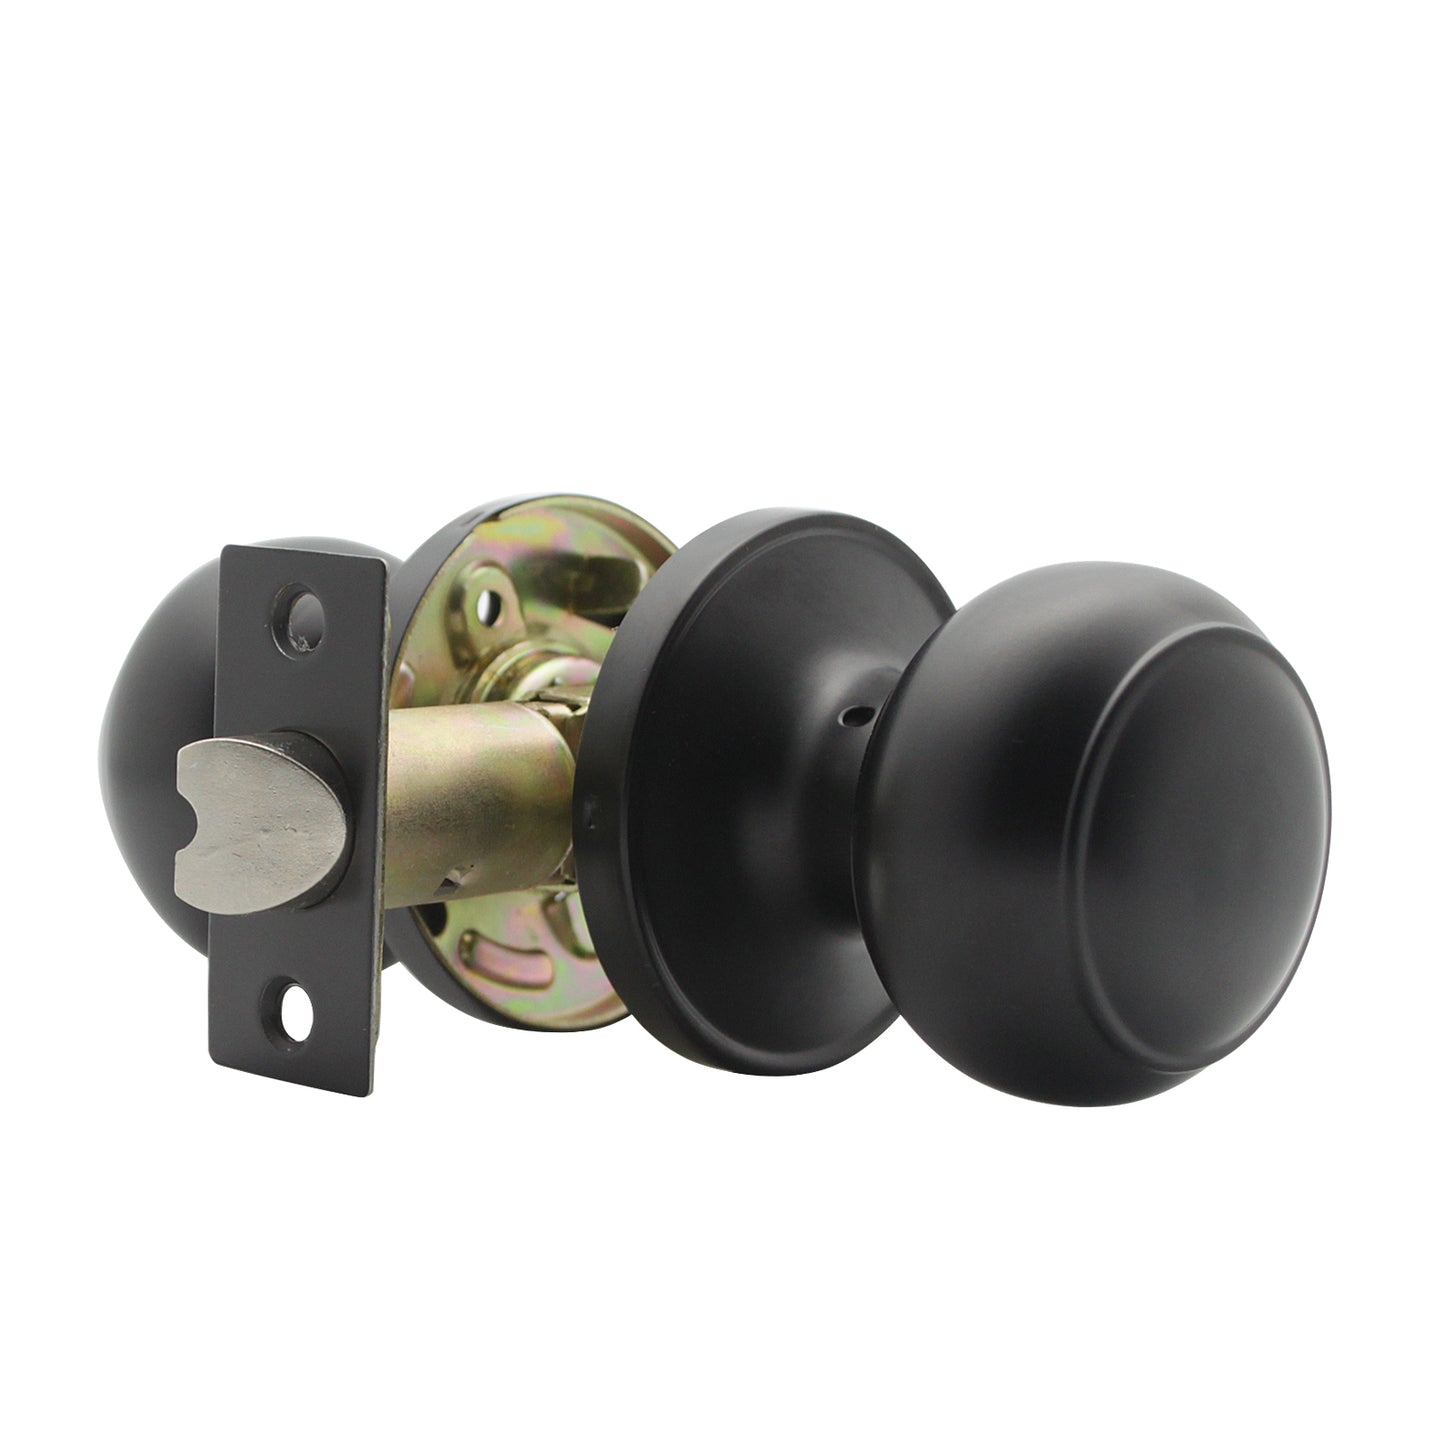 Flat Ball Passage Door Knobs for Closet and Hallway, Black Finish DL609BKPS - Probrico